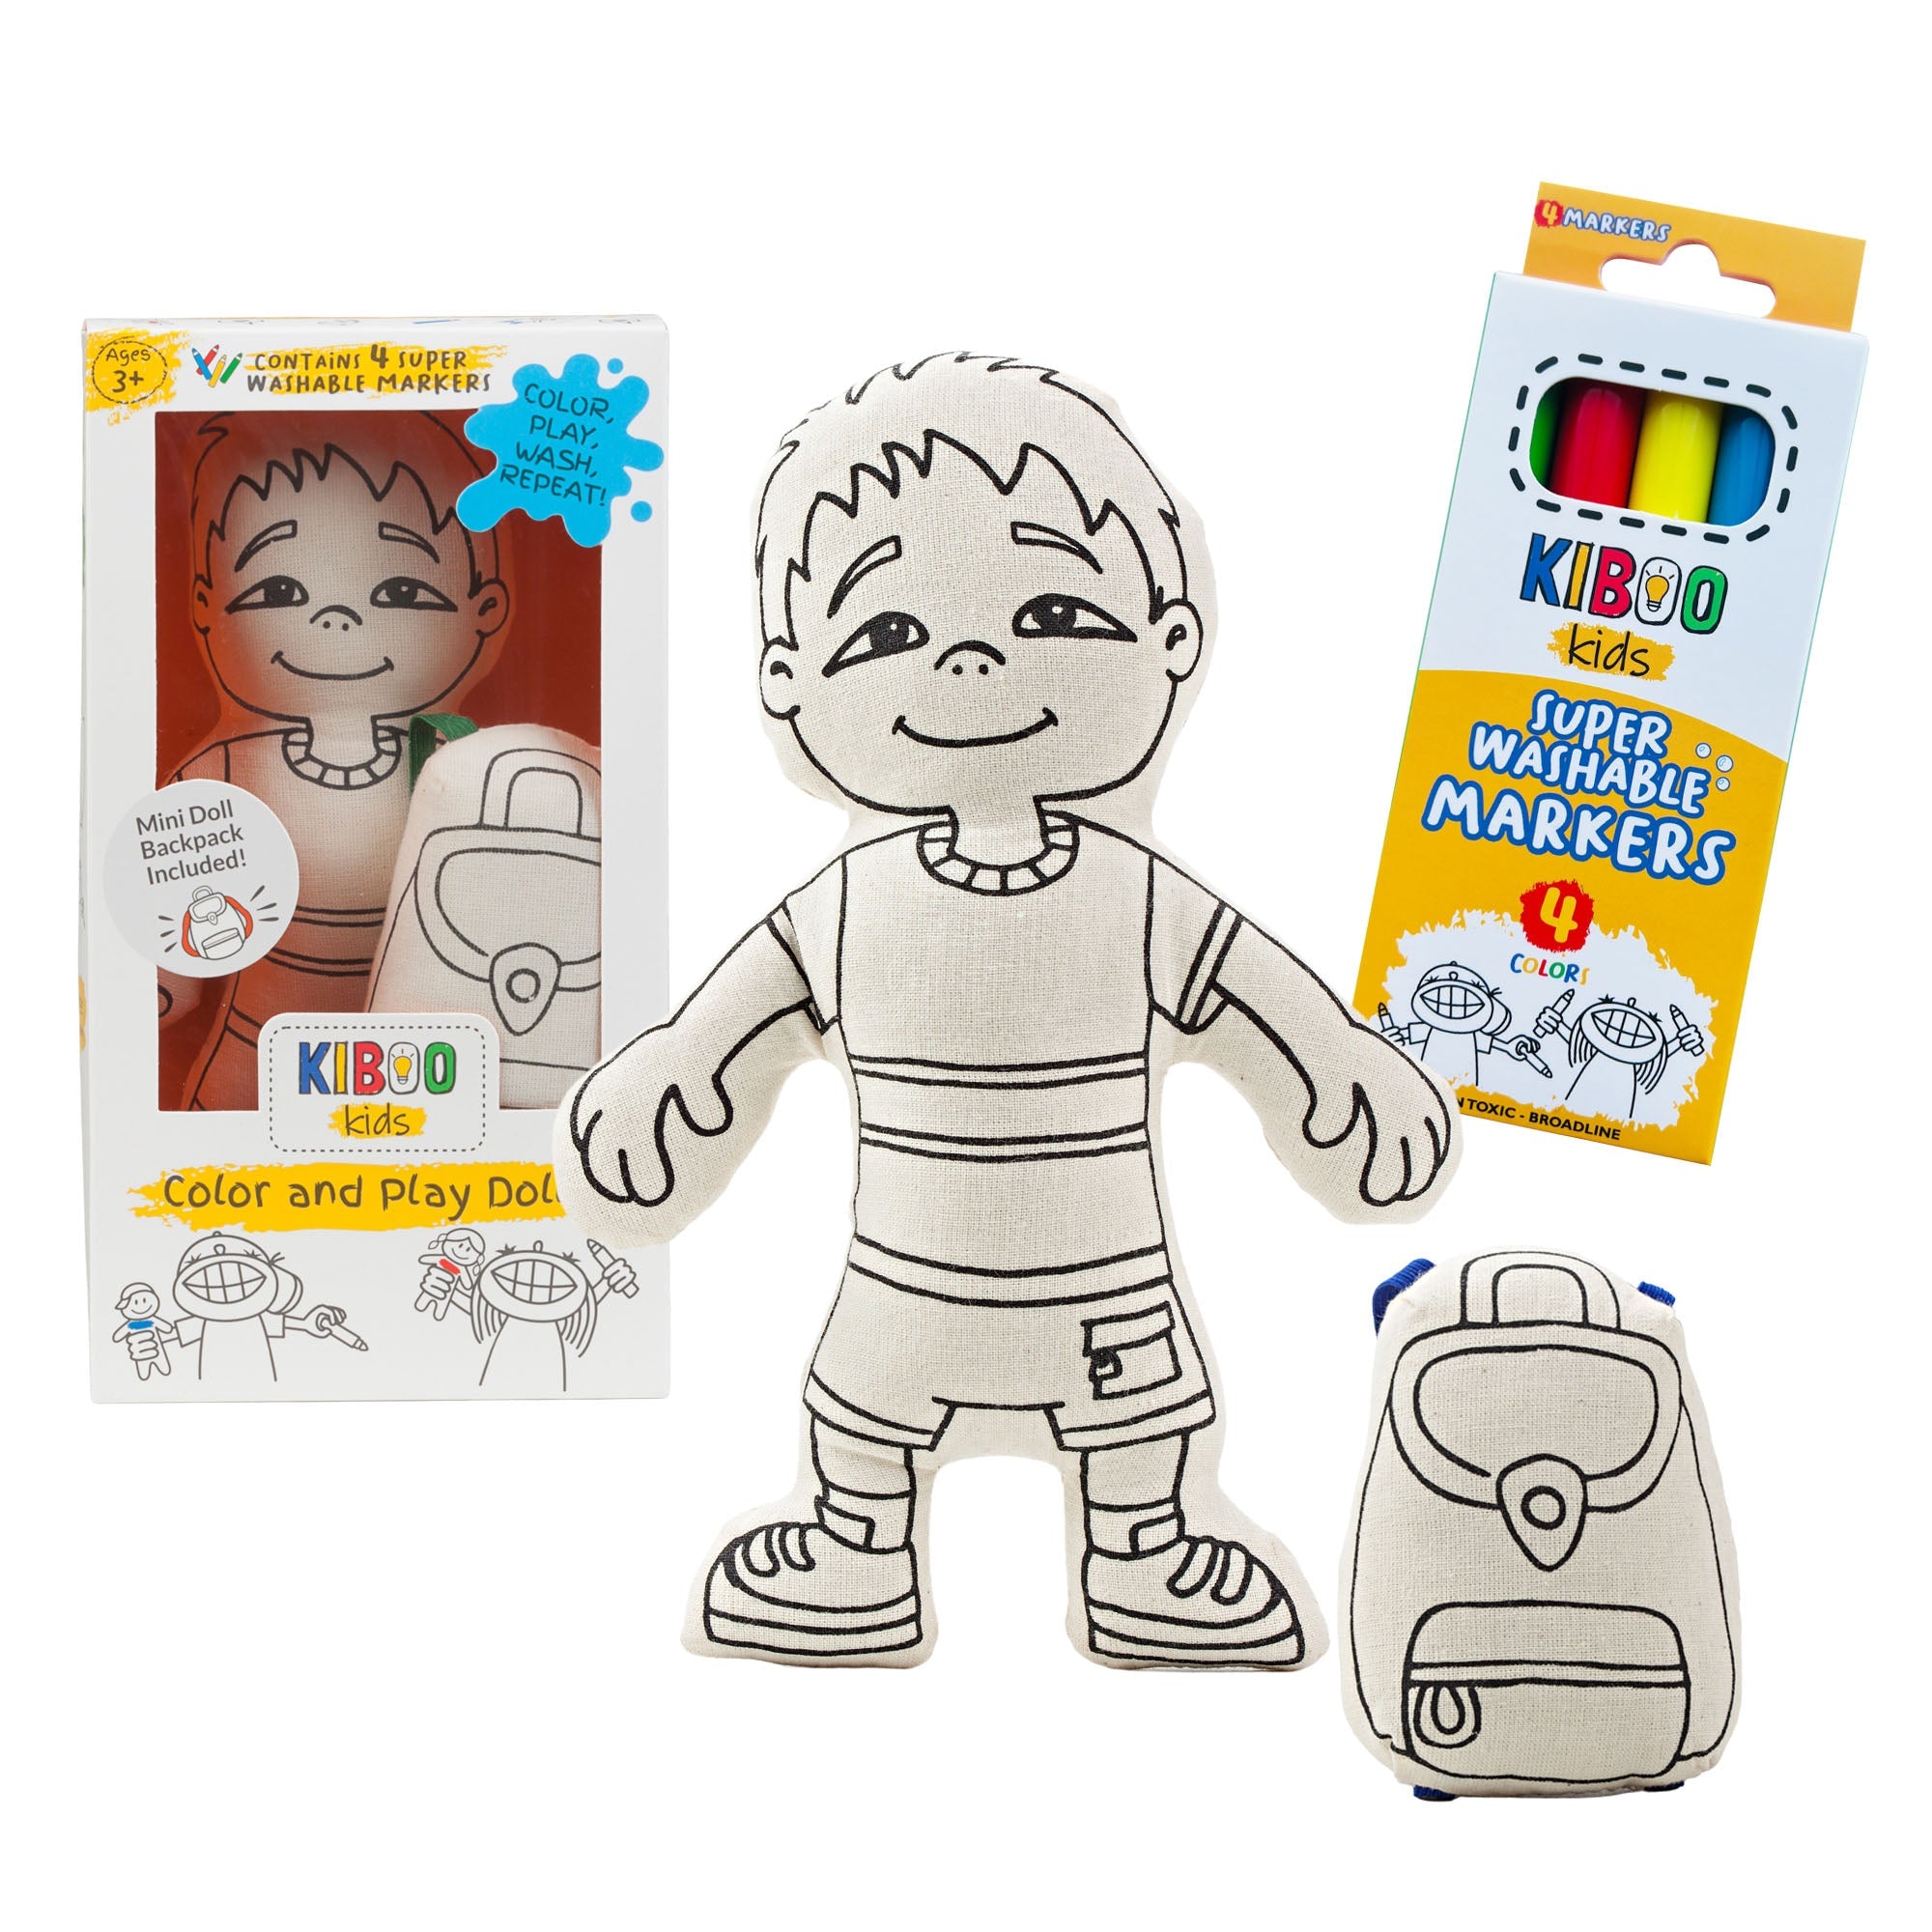 Kiboo Kids: Boy With Pocket Shorts - Colorable And Washable Doll For Creative Play